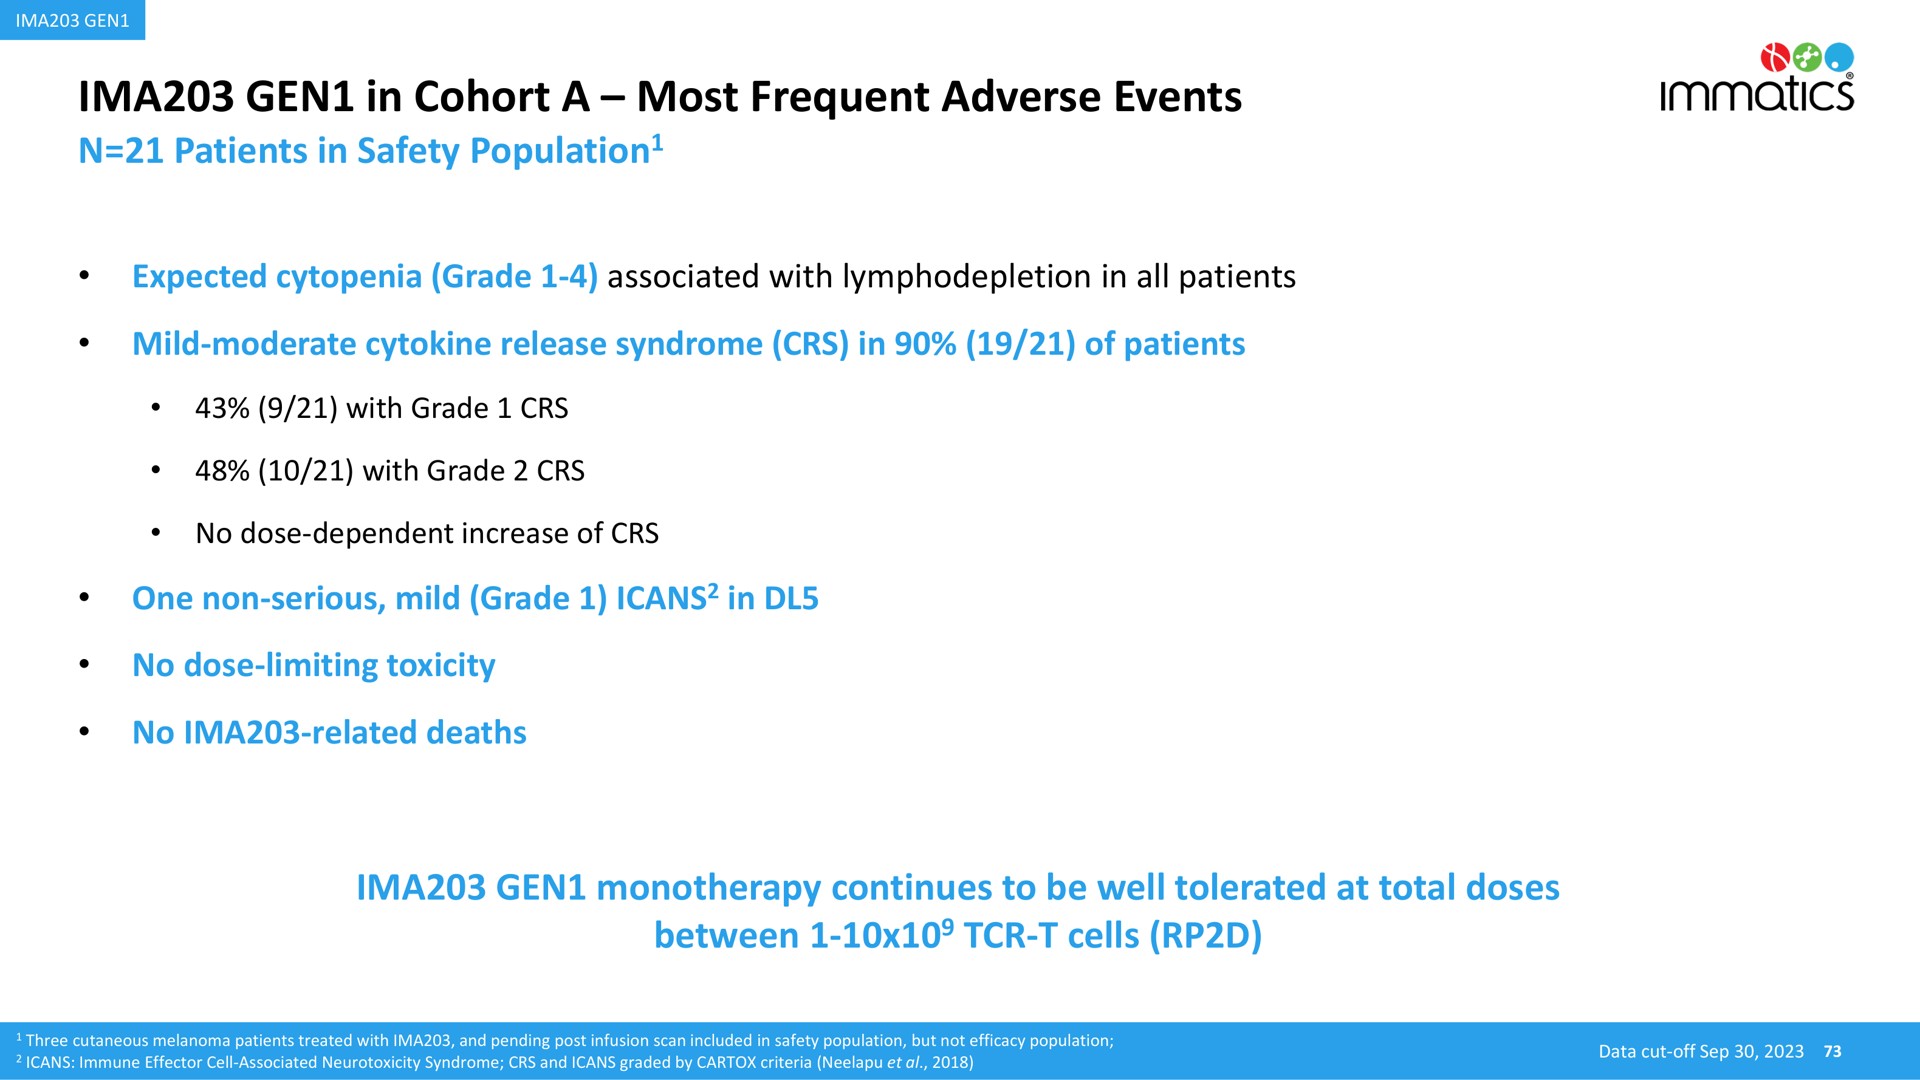 gen in cohort a most frequent adverse events | Immatics